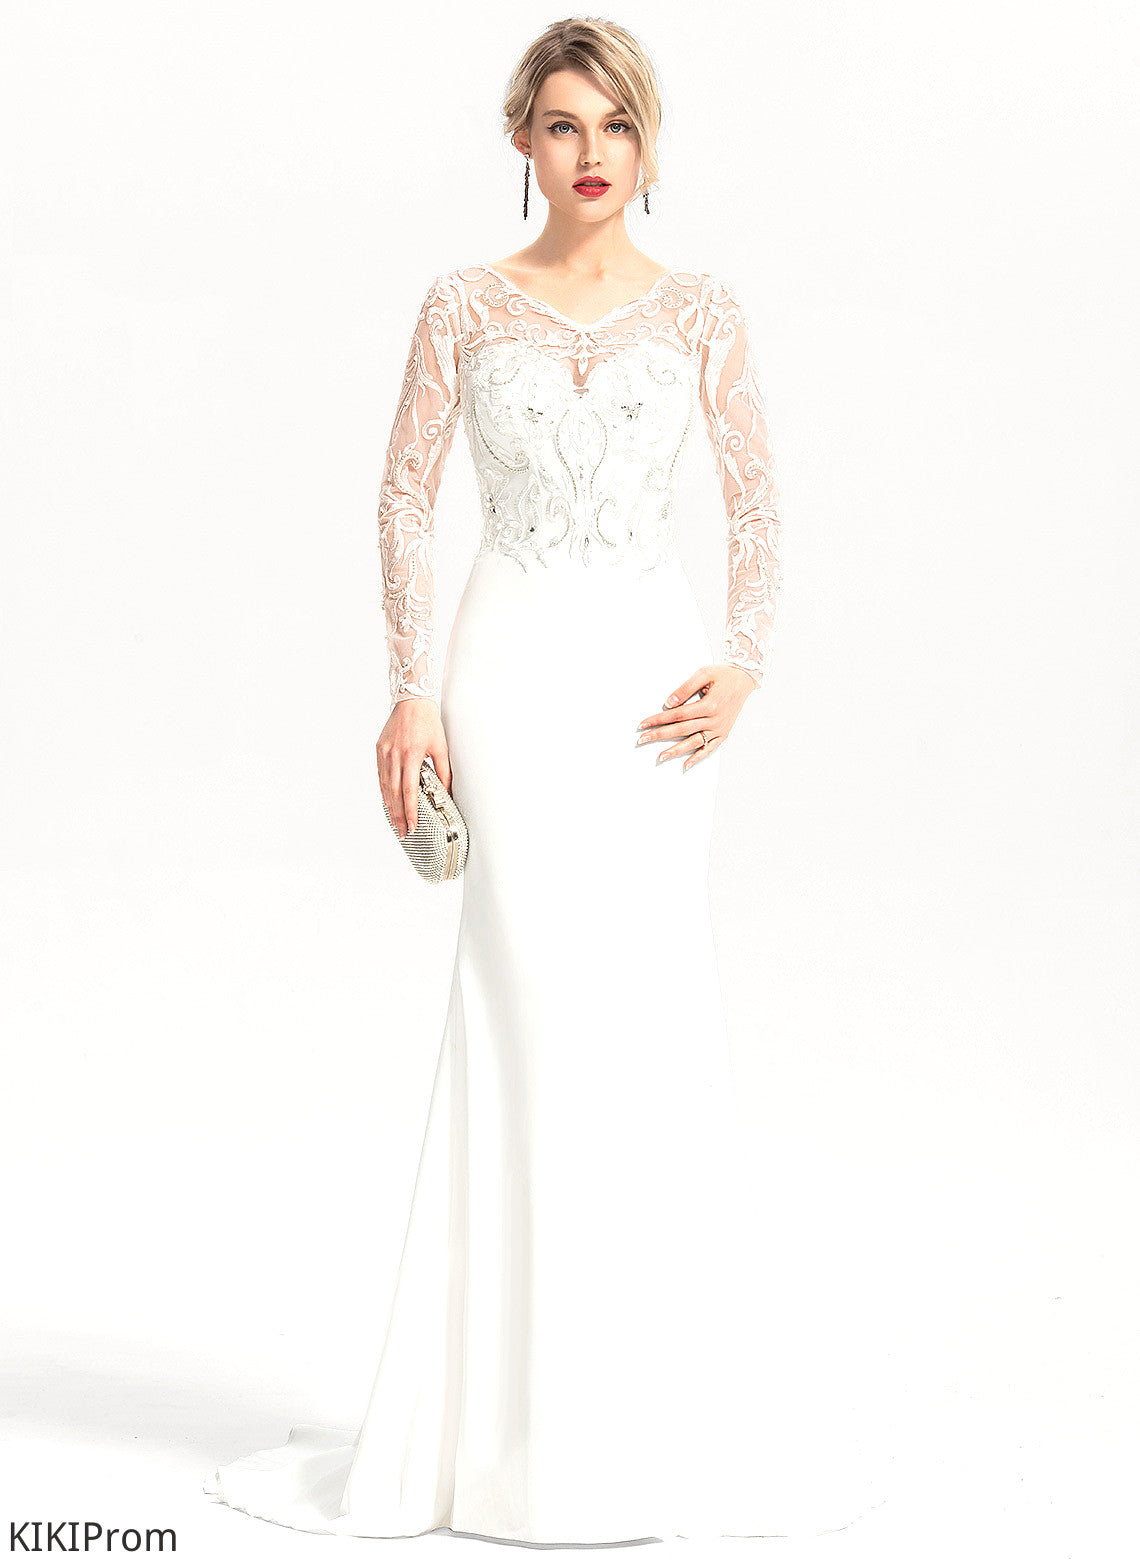 With Dress Trumpet/Mermaid Stretch Beading V-neck Sweep Train Lace Wedding Dresses Wedding Allyson Sequins Crepe